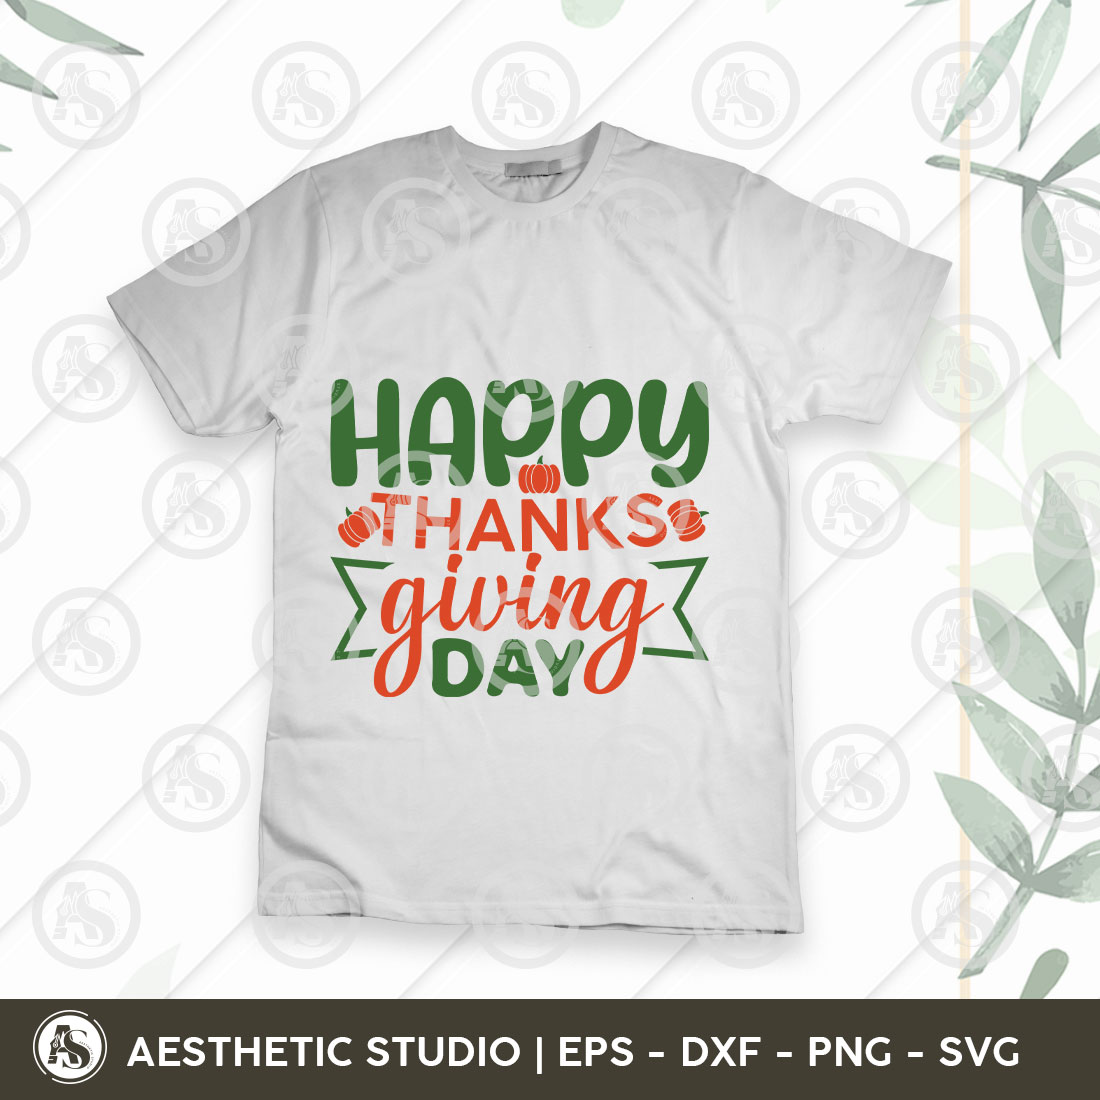 Happy Thanksgiving Day, Thanksgiving Svg, Fall Svg, Pumpkin, Thanksgiving Shirt Png Cut Files, Turkey svg, Gobble Svg, Pumpkin Spice, Fall Leaves Svg, Autumn Svg, Grateful svg, Thanksgiving Quote, Cut Files for Cricut, Thanksgiving Sayings, Svg, Dxg, Png, Eps preview image.